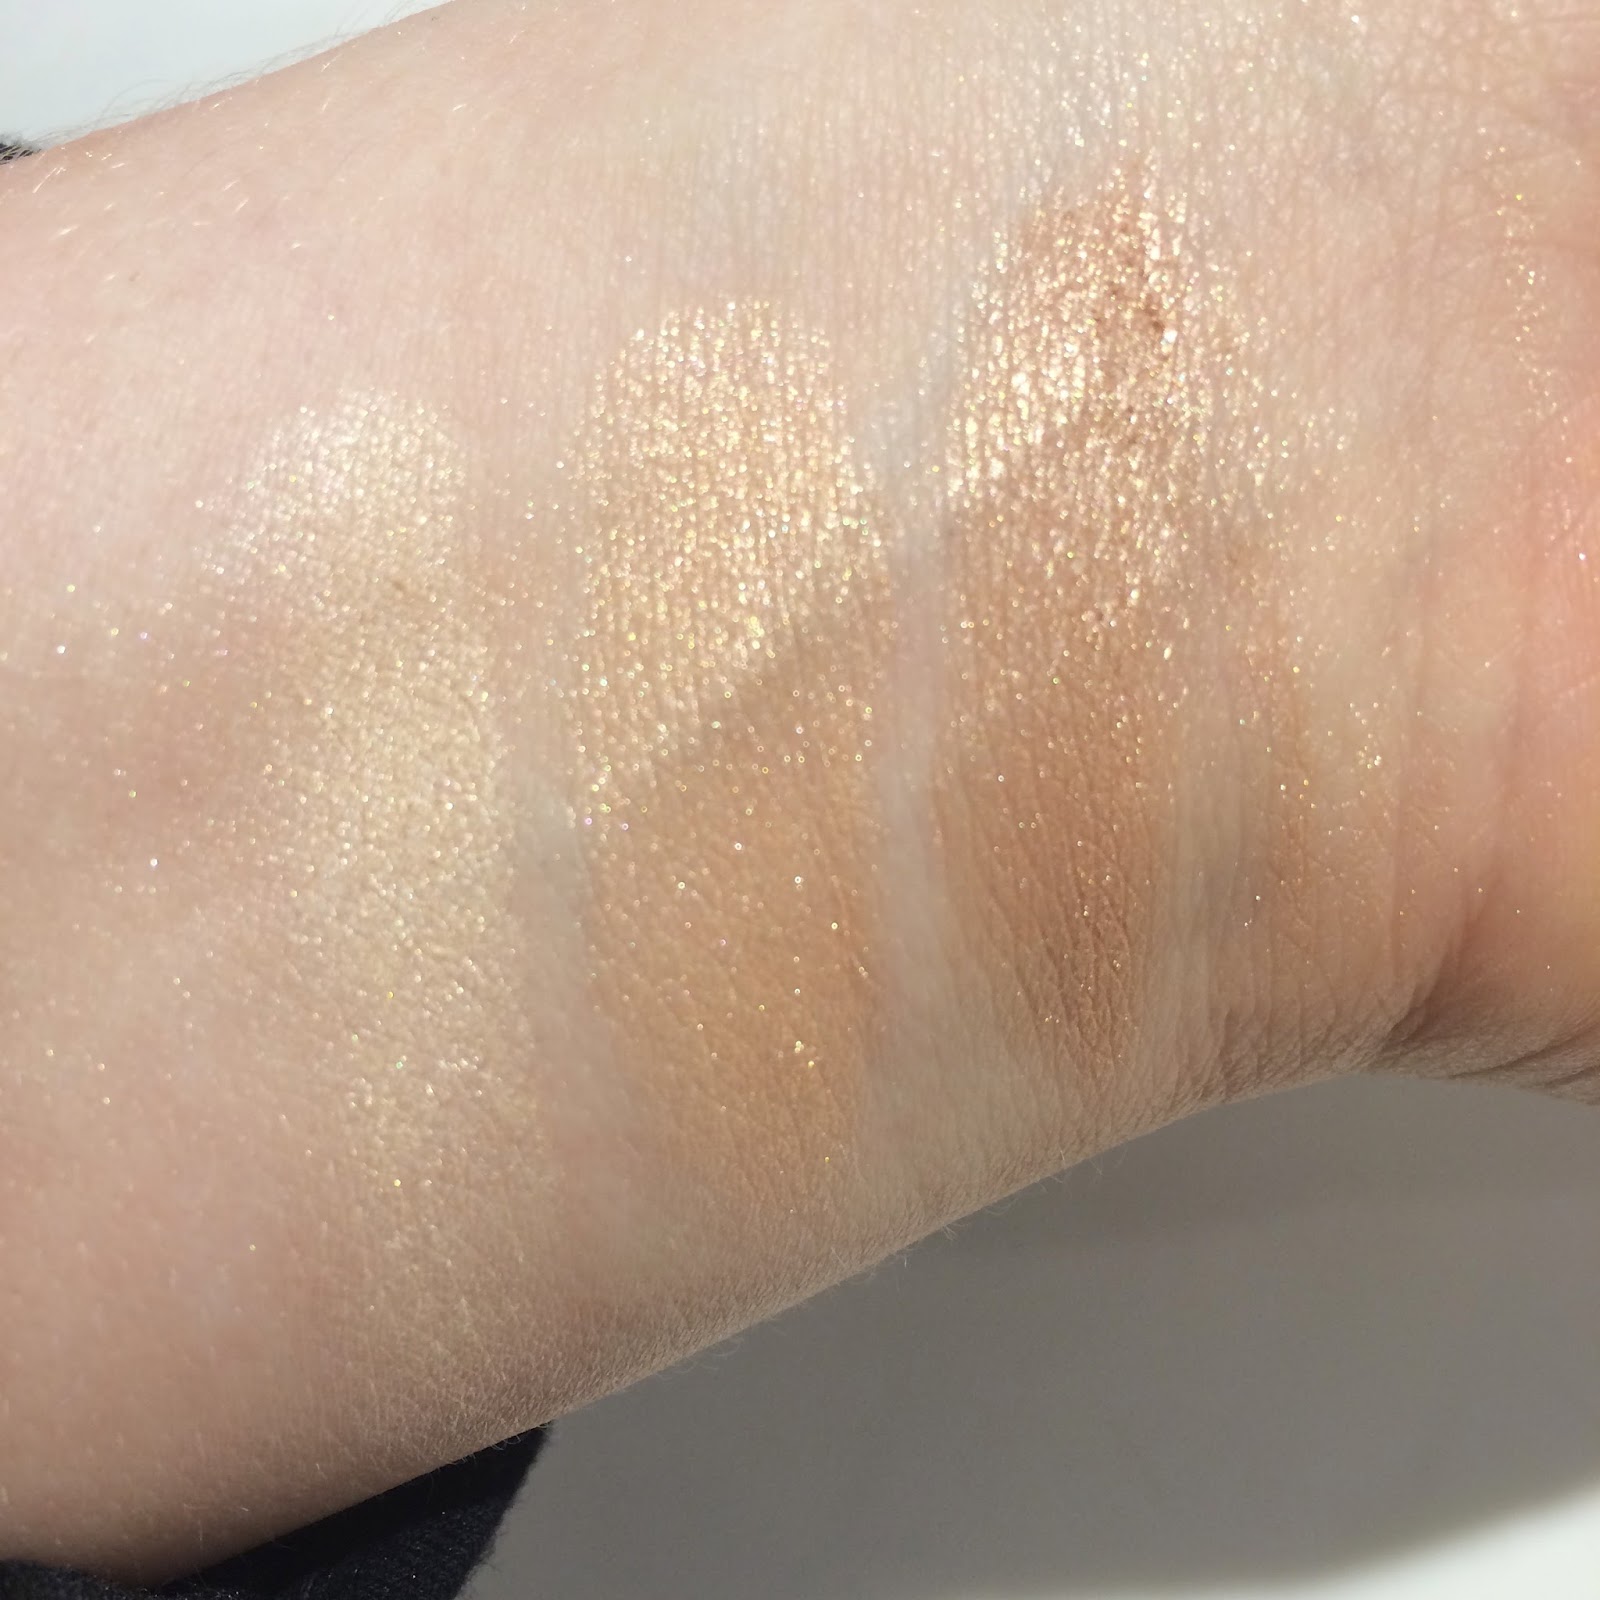 Classy on the Run: Champagne Pop Review Swatches Compared to Becca Moonstone and Opal